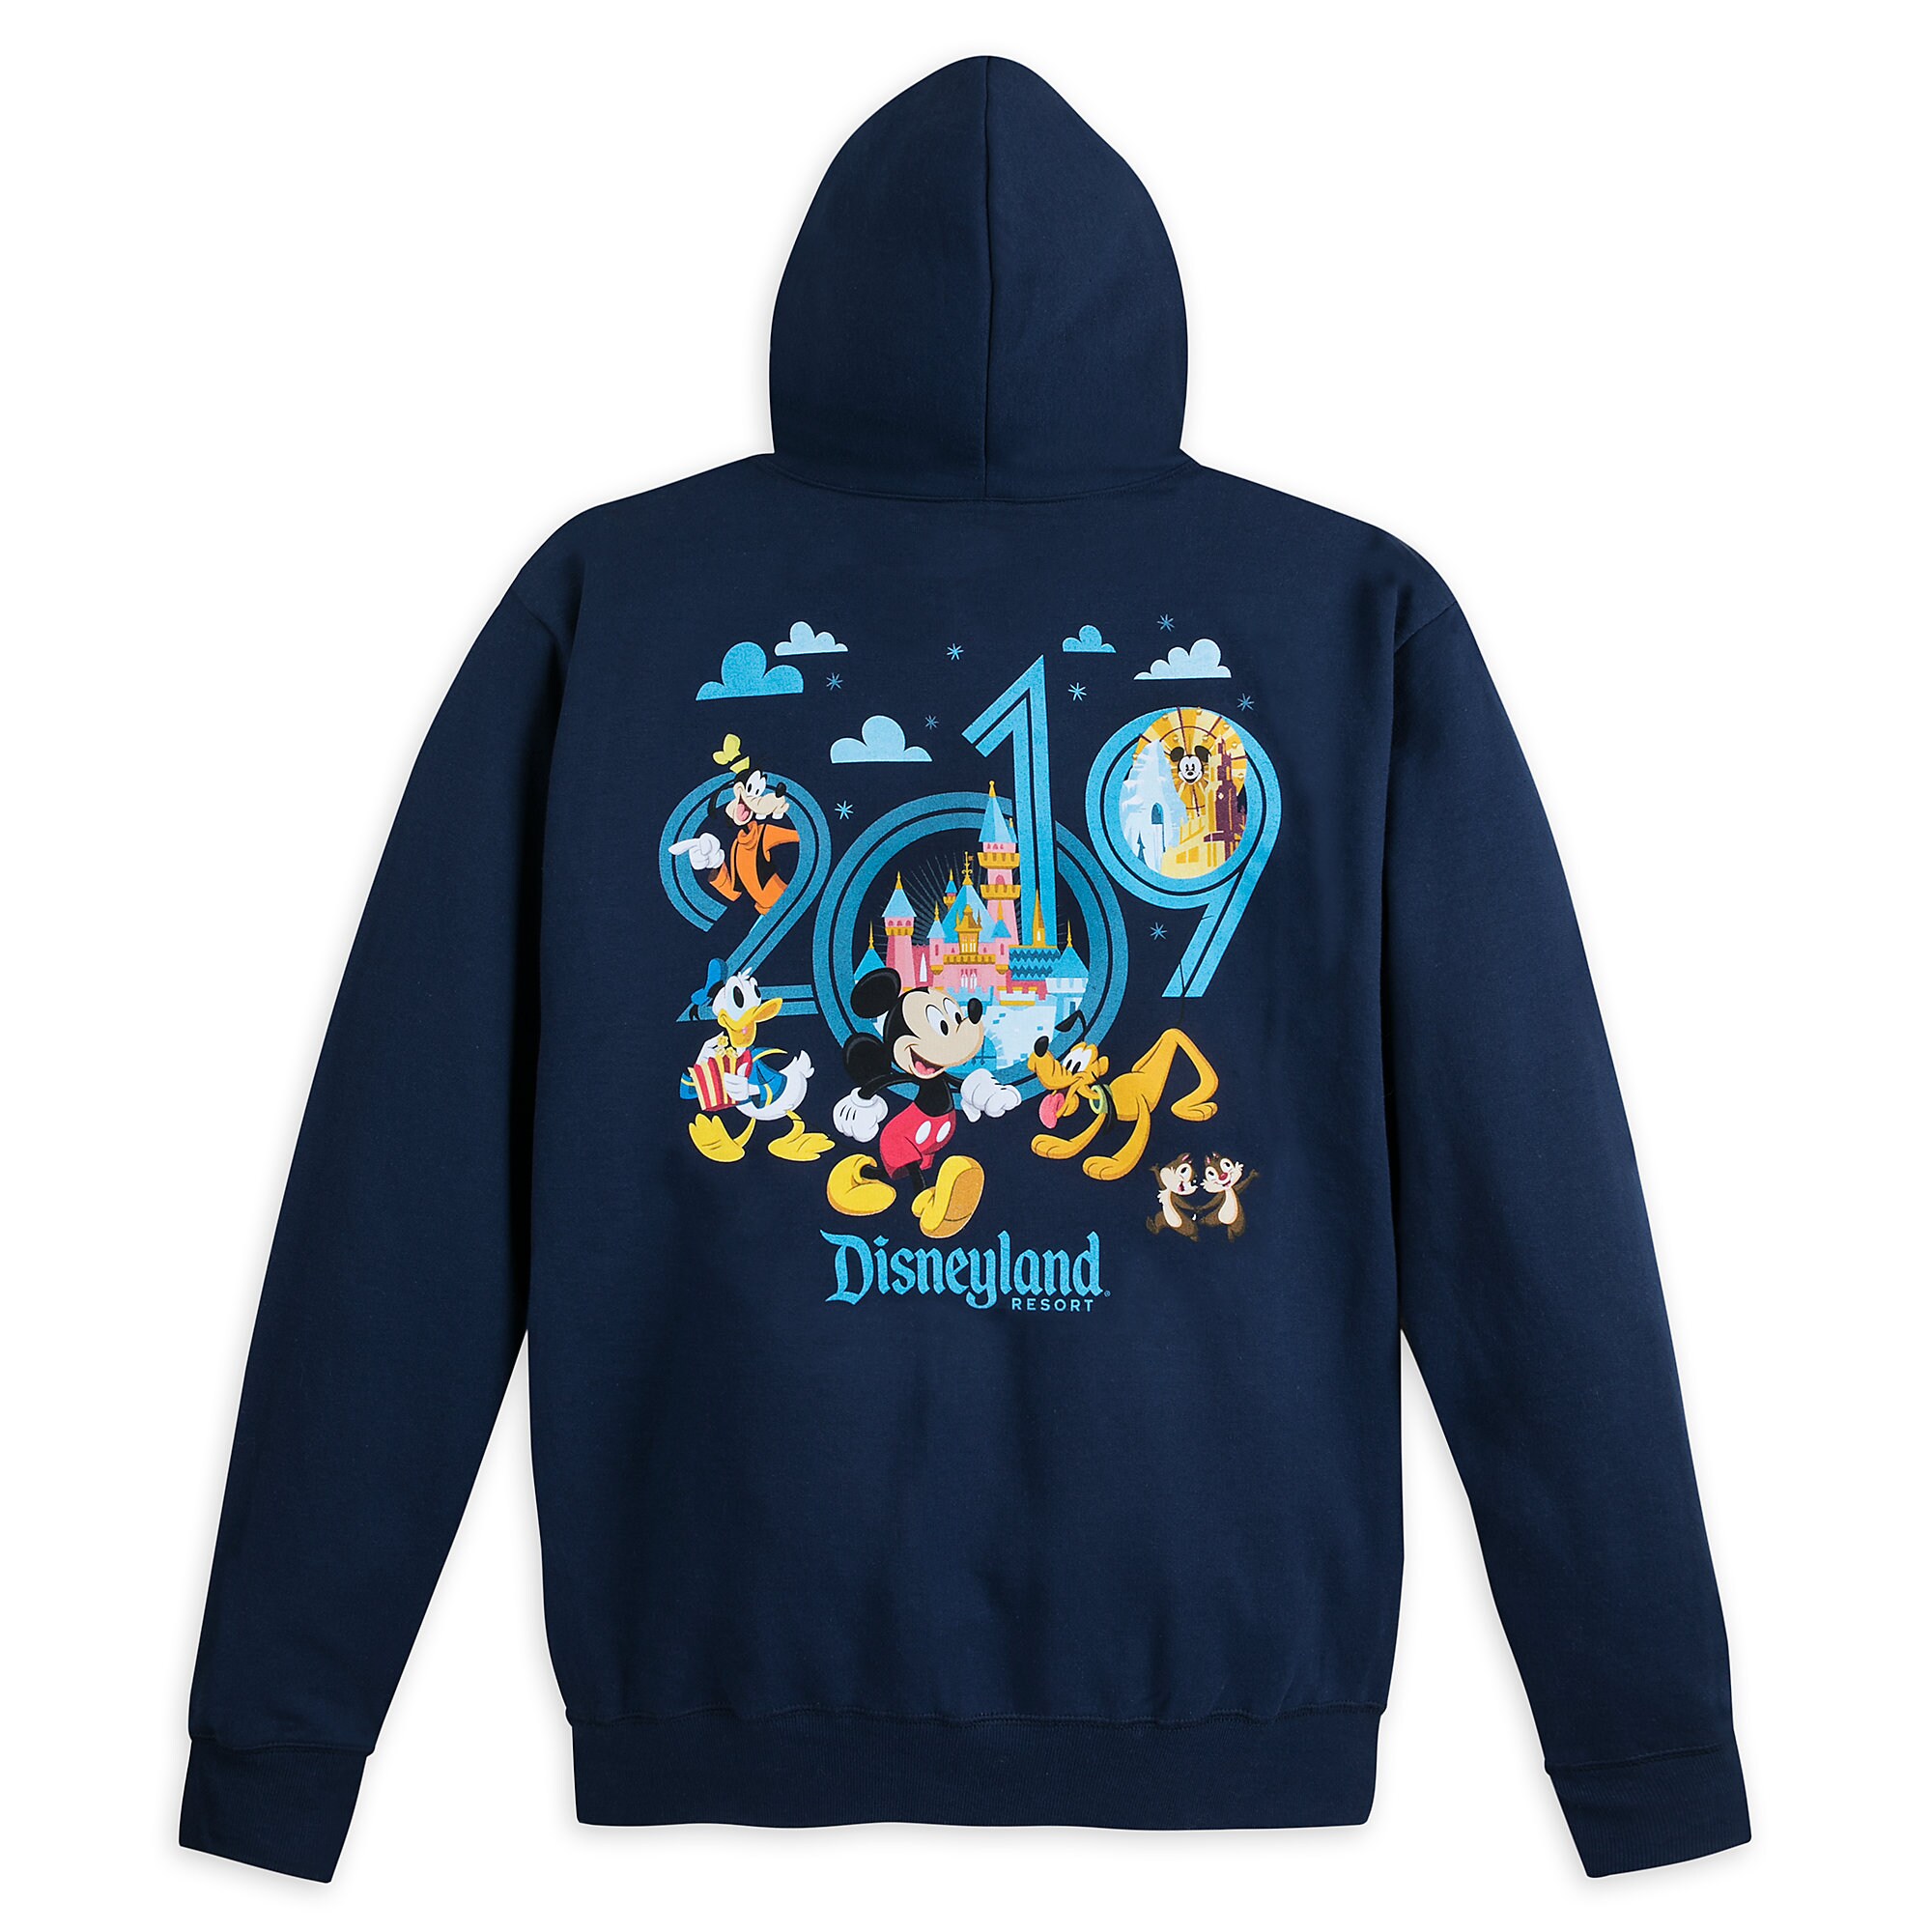 Mickey Mouse and Friends Hoodie for Adults - Disneyland 2019